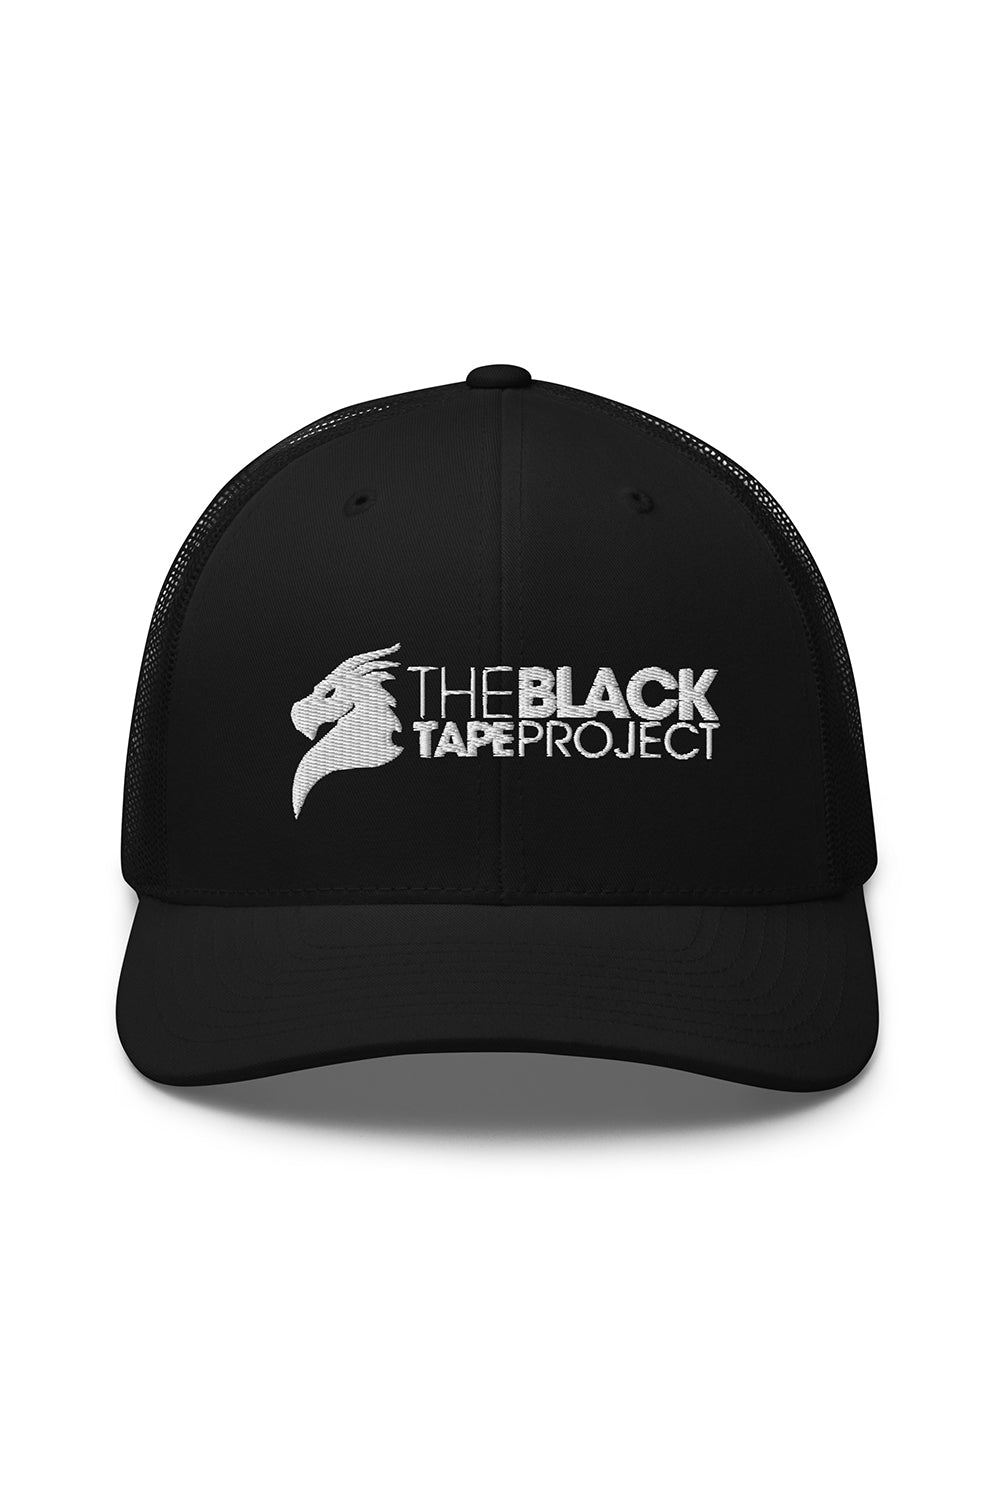 Black Tape Project Dragon Embroidered Trucker Hat - Black Tape Project